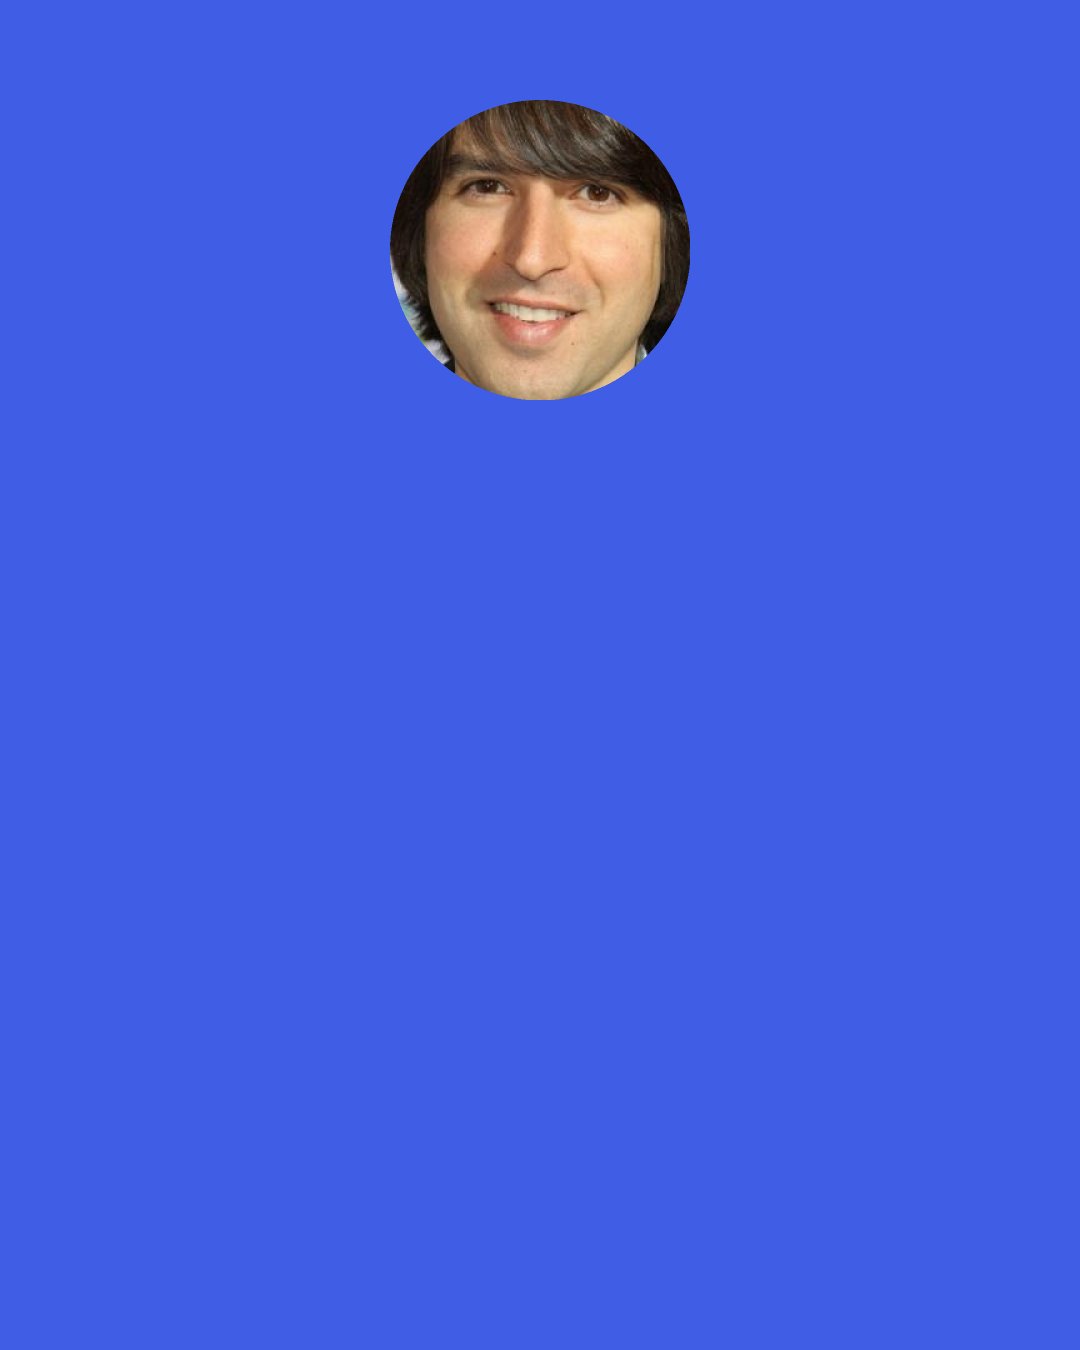 Demetri Martin: Yes" actually means "No" 100% of the time, when the question is "Can I give you some advice?